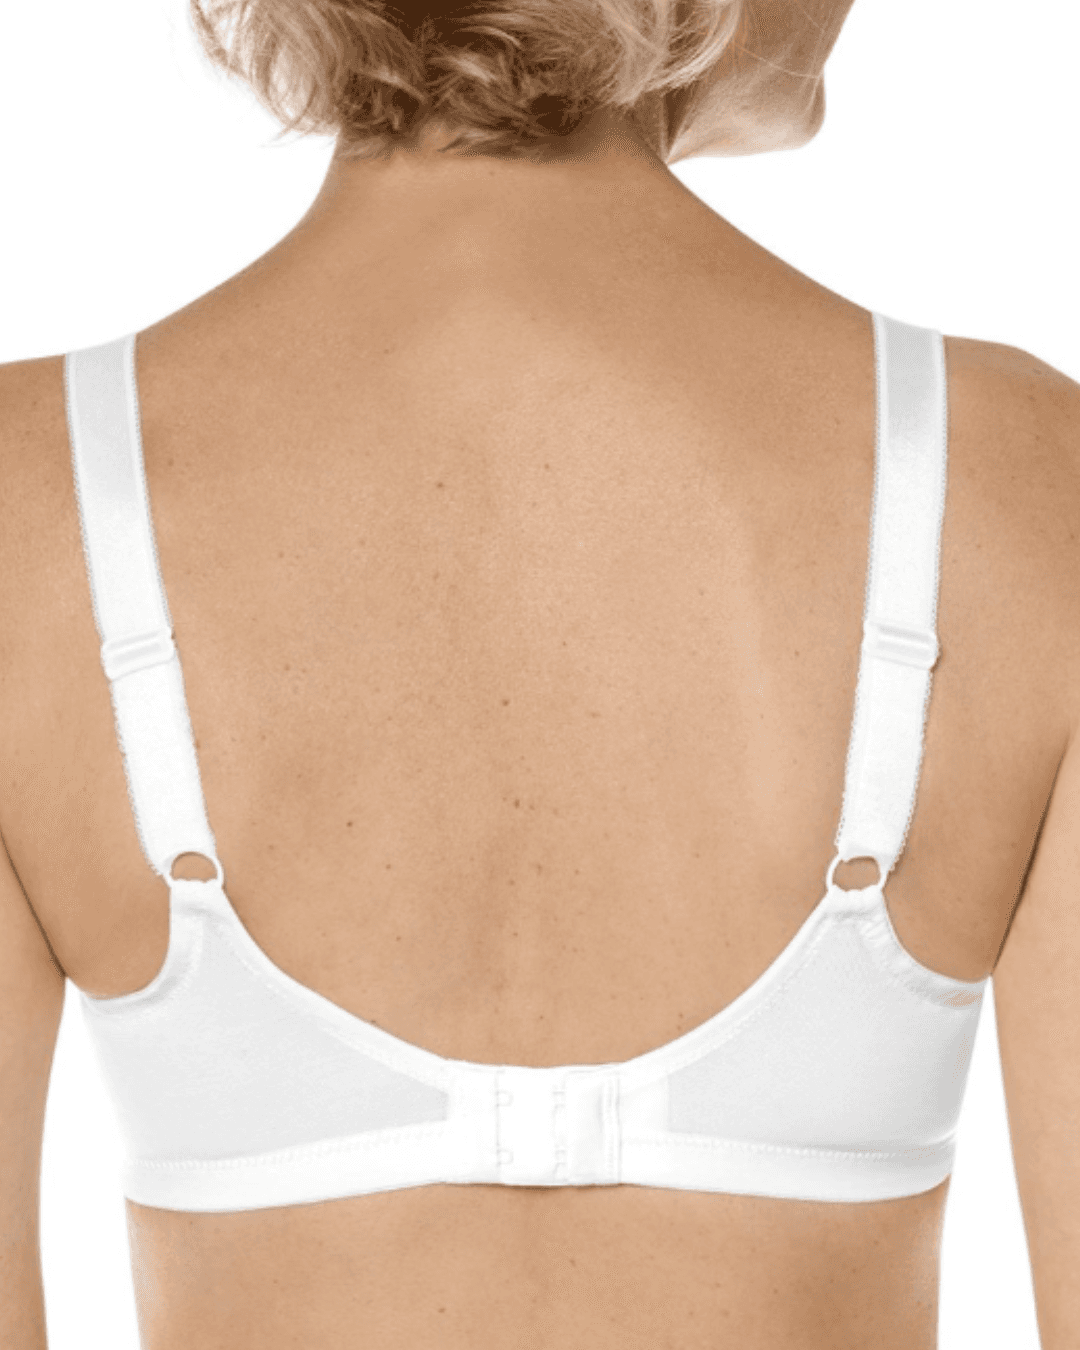 Jodee Mastectomy Bras - Jodee Bra Extenders - The tiny product that makes  your Too-Tight bras, wearable. But how DO extenders work and WHO should  be using them? 💕 Bra extenders work